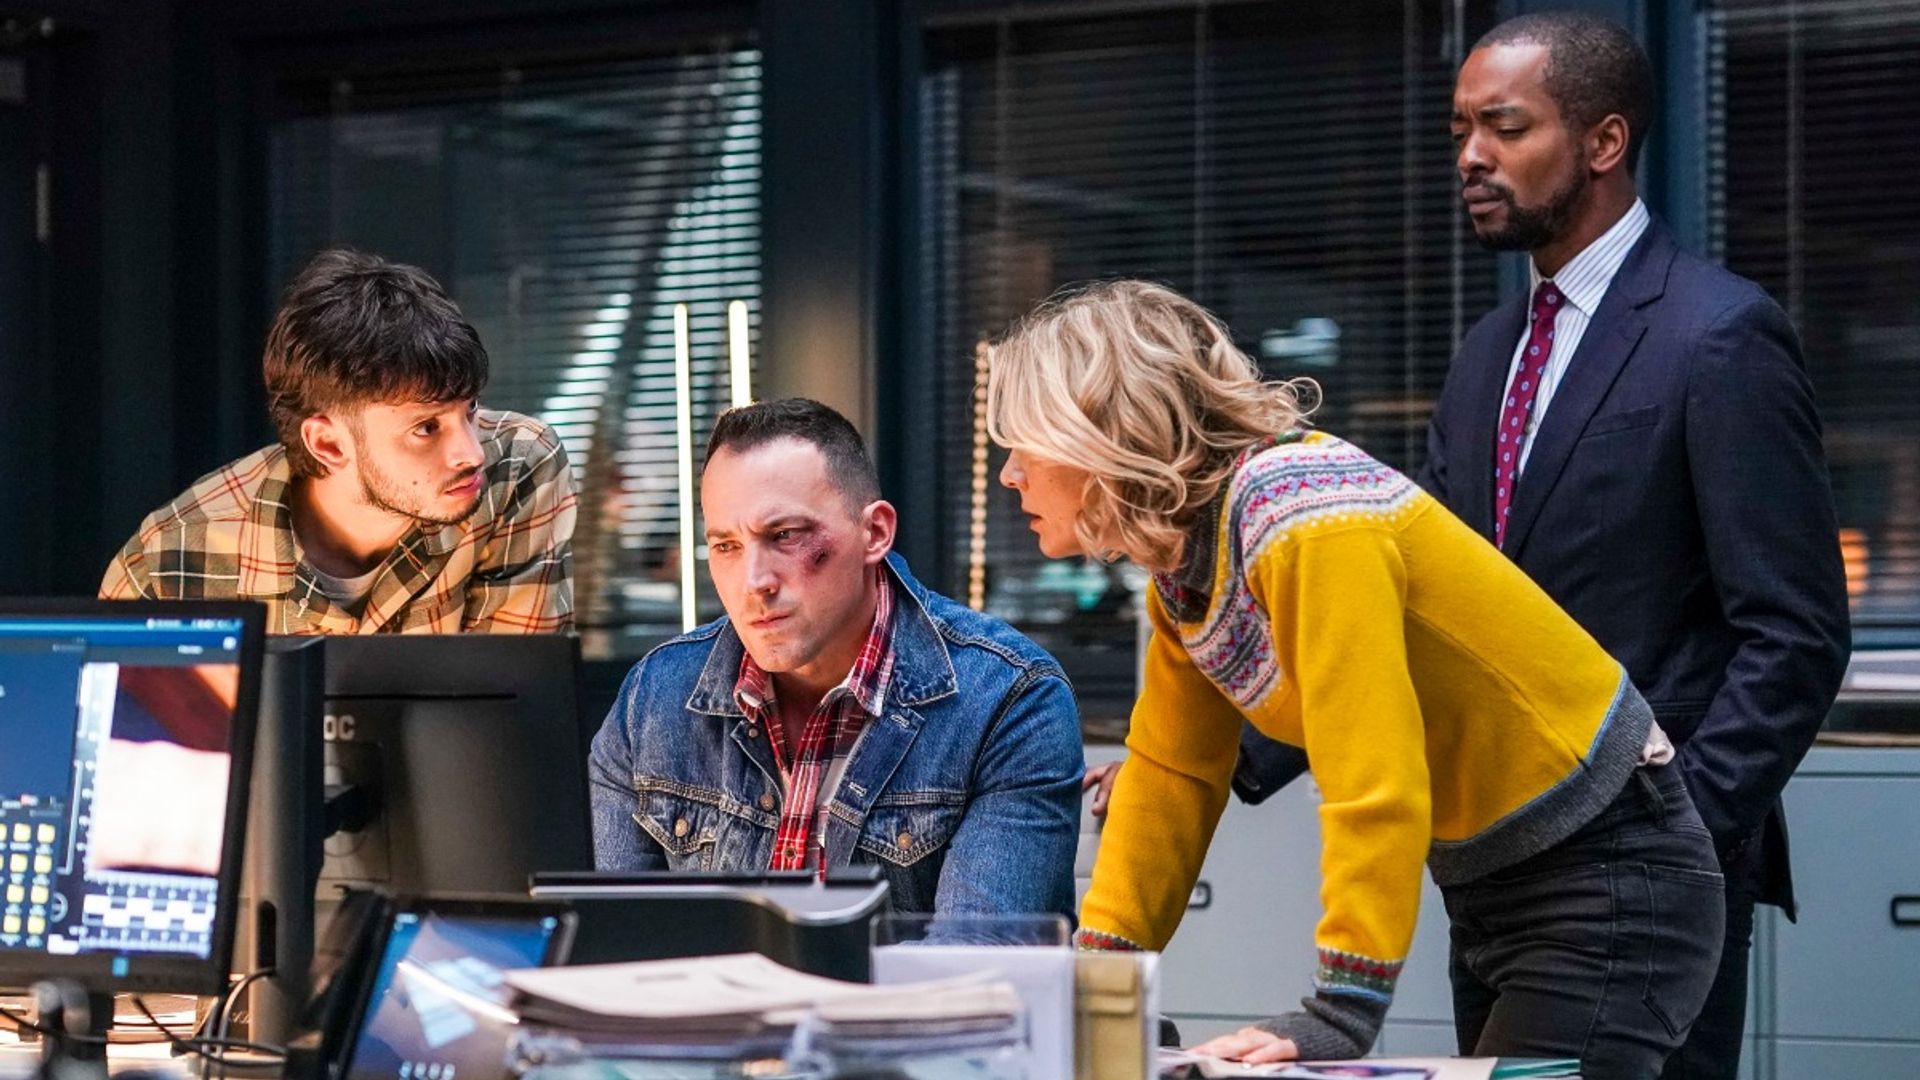 Silent Witness viewers 'at breaking point' over latest episode - here's why